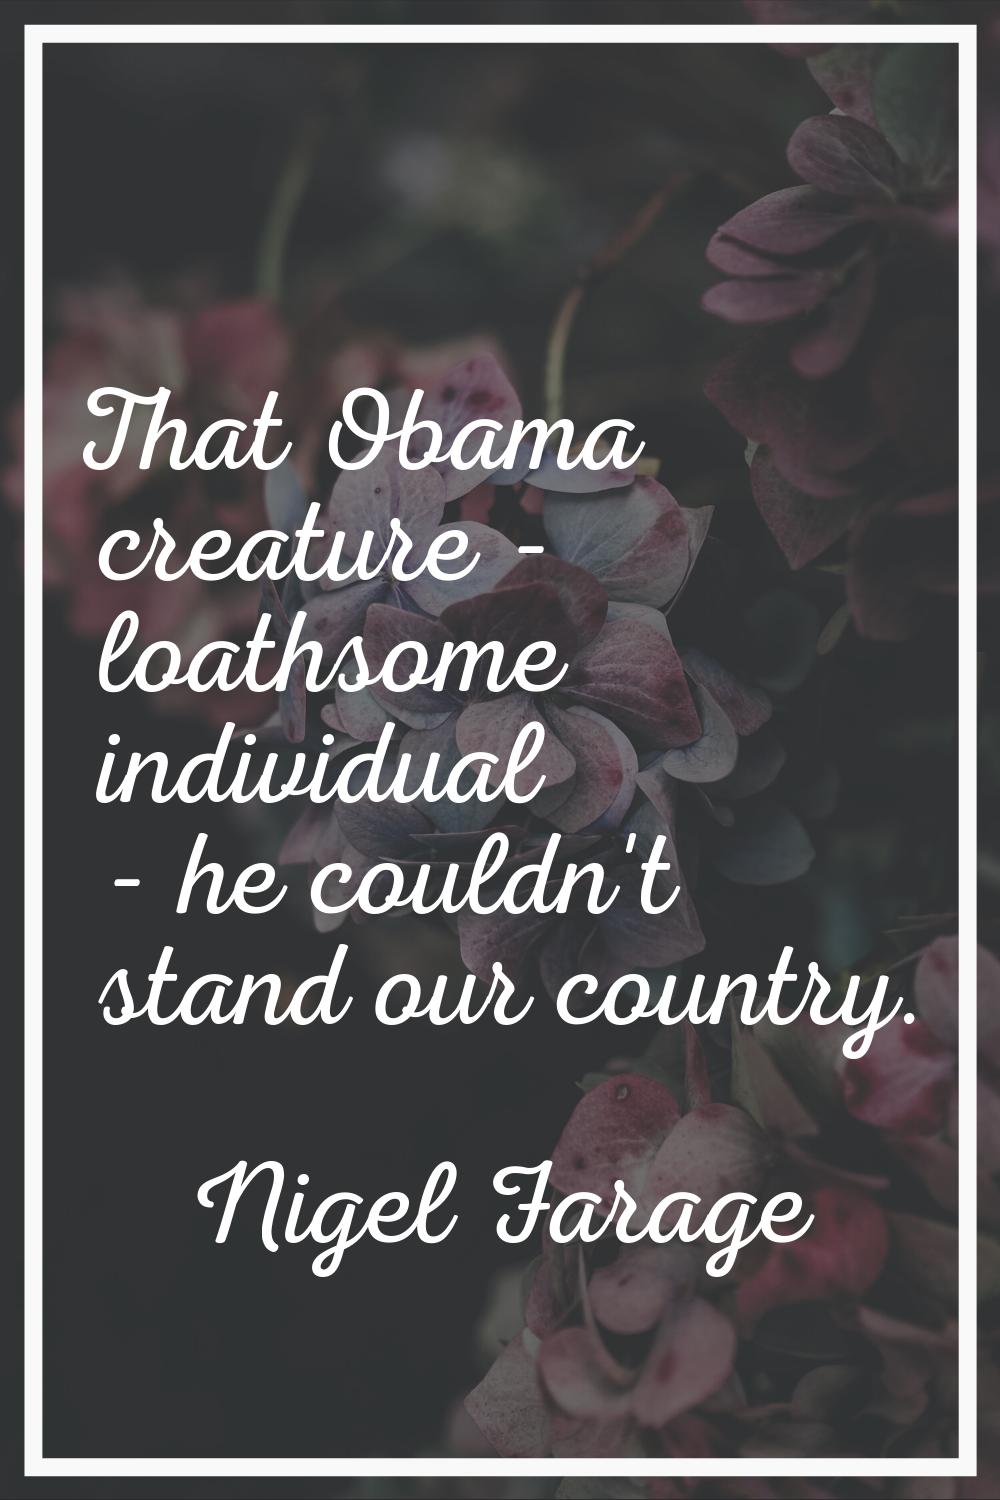 That Obama creature - loathsome individual - he couldn't stand our country.